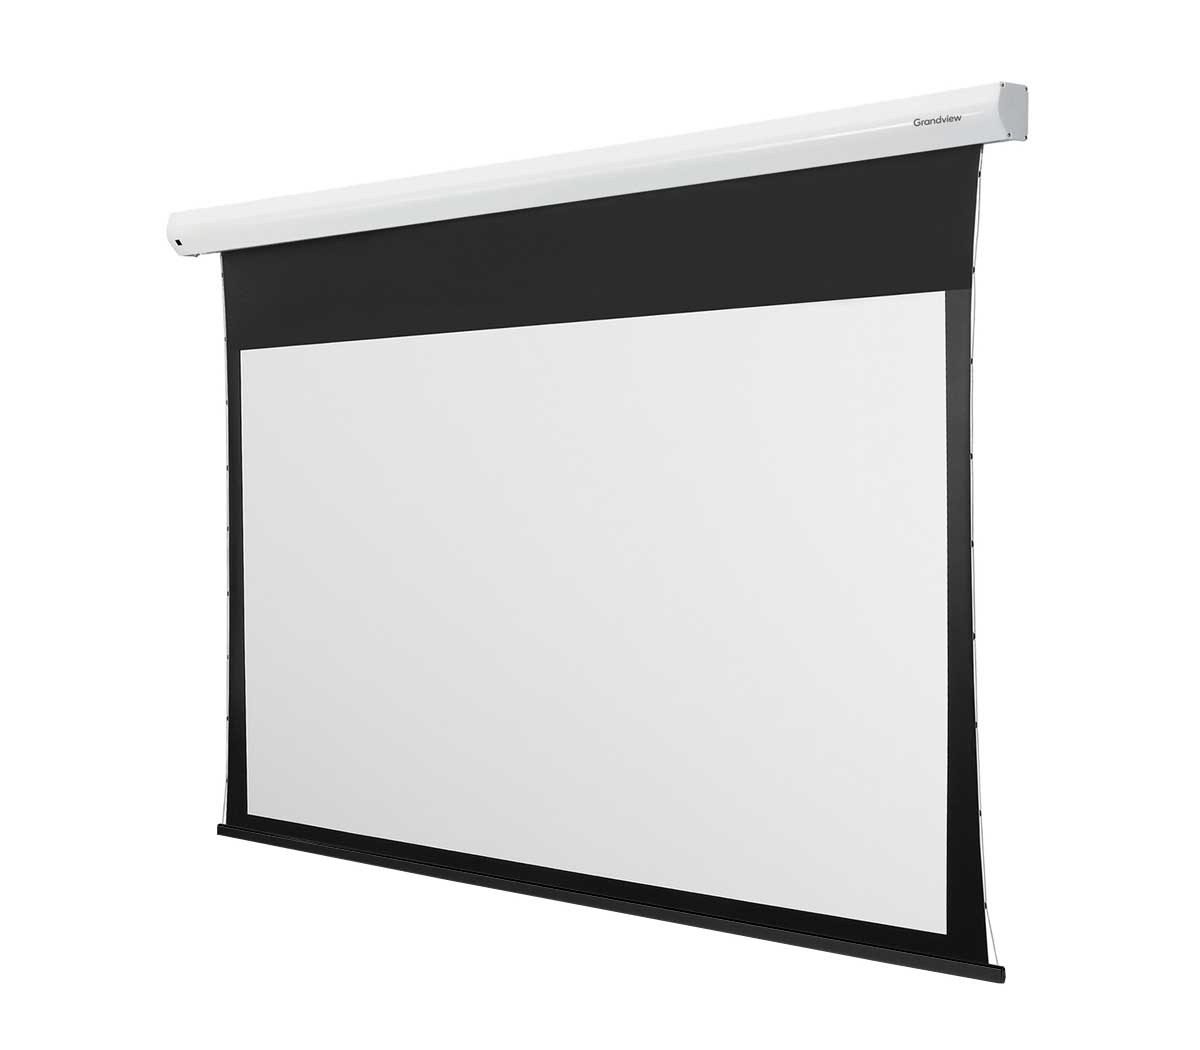 Grandview 16:9 Tab Tensioned Home Theatre Projector Screen